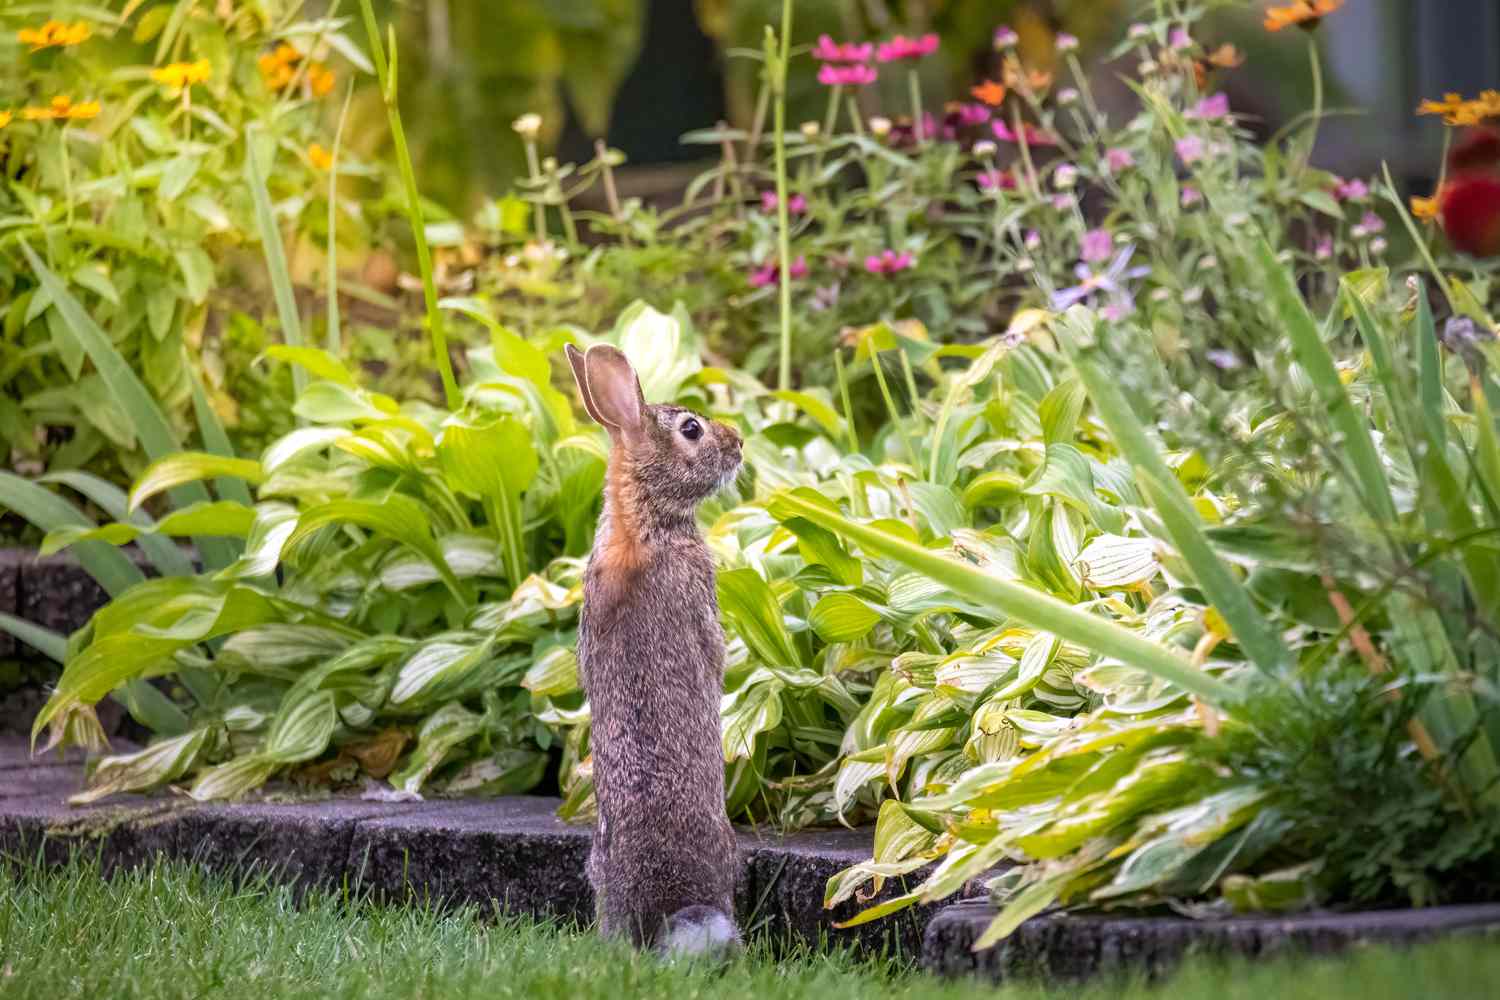 What Are Some Ways To Keep Wild Rabbits?